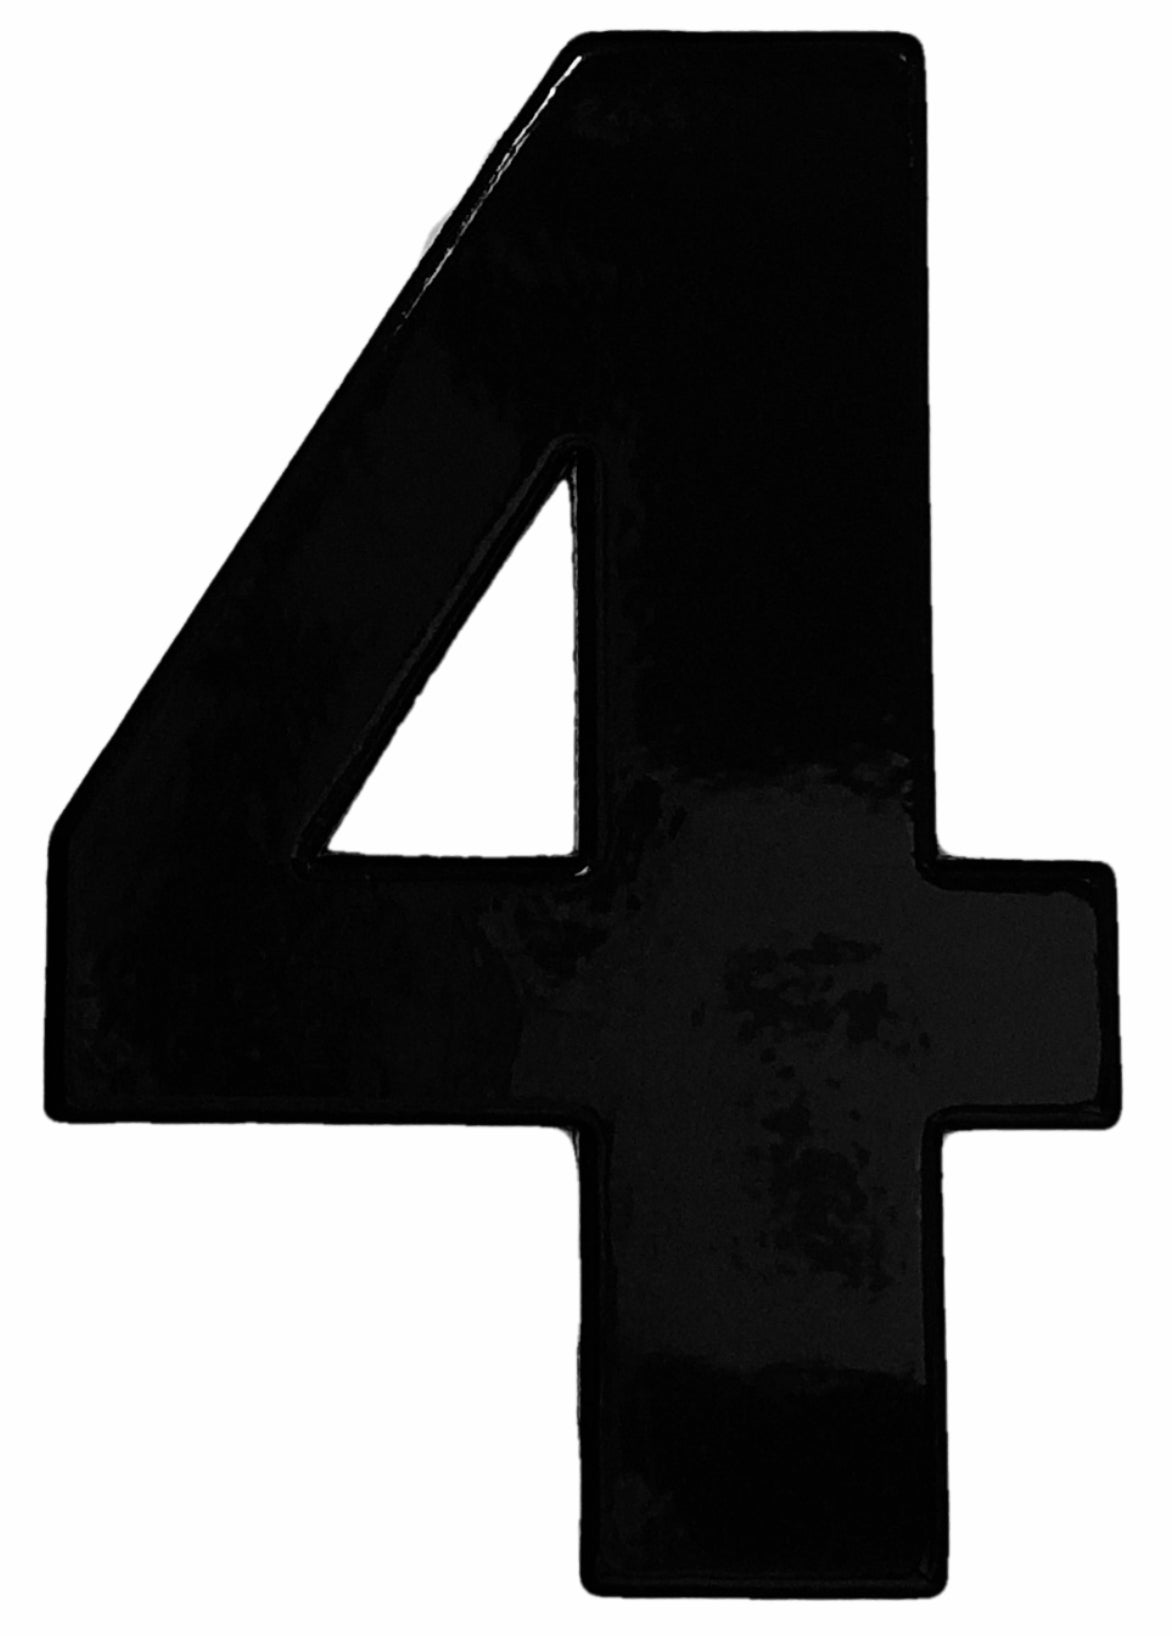 Bold Black Reflective House Number - durable and easy to apply.